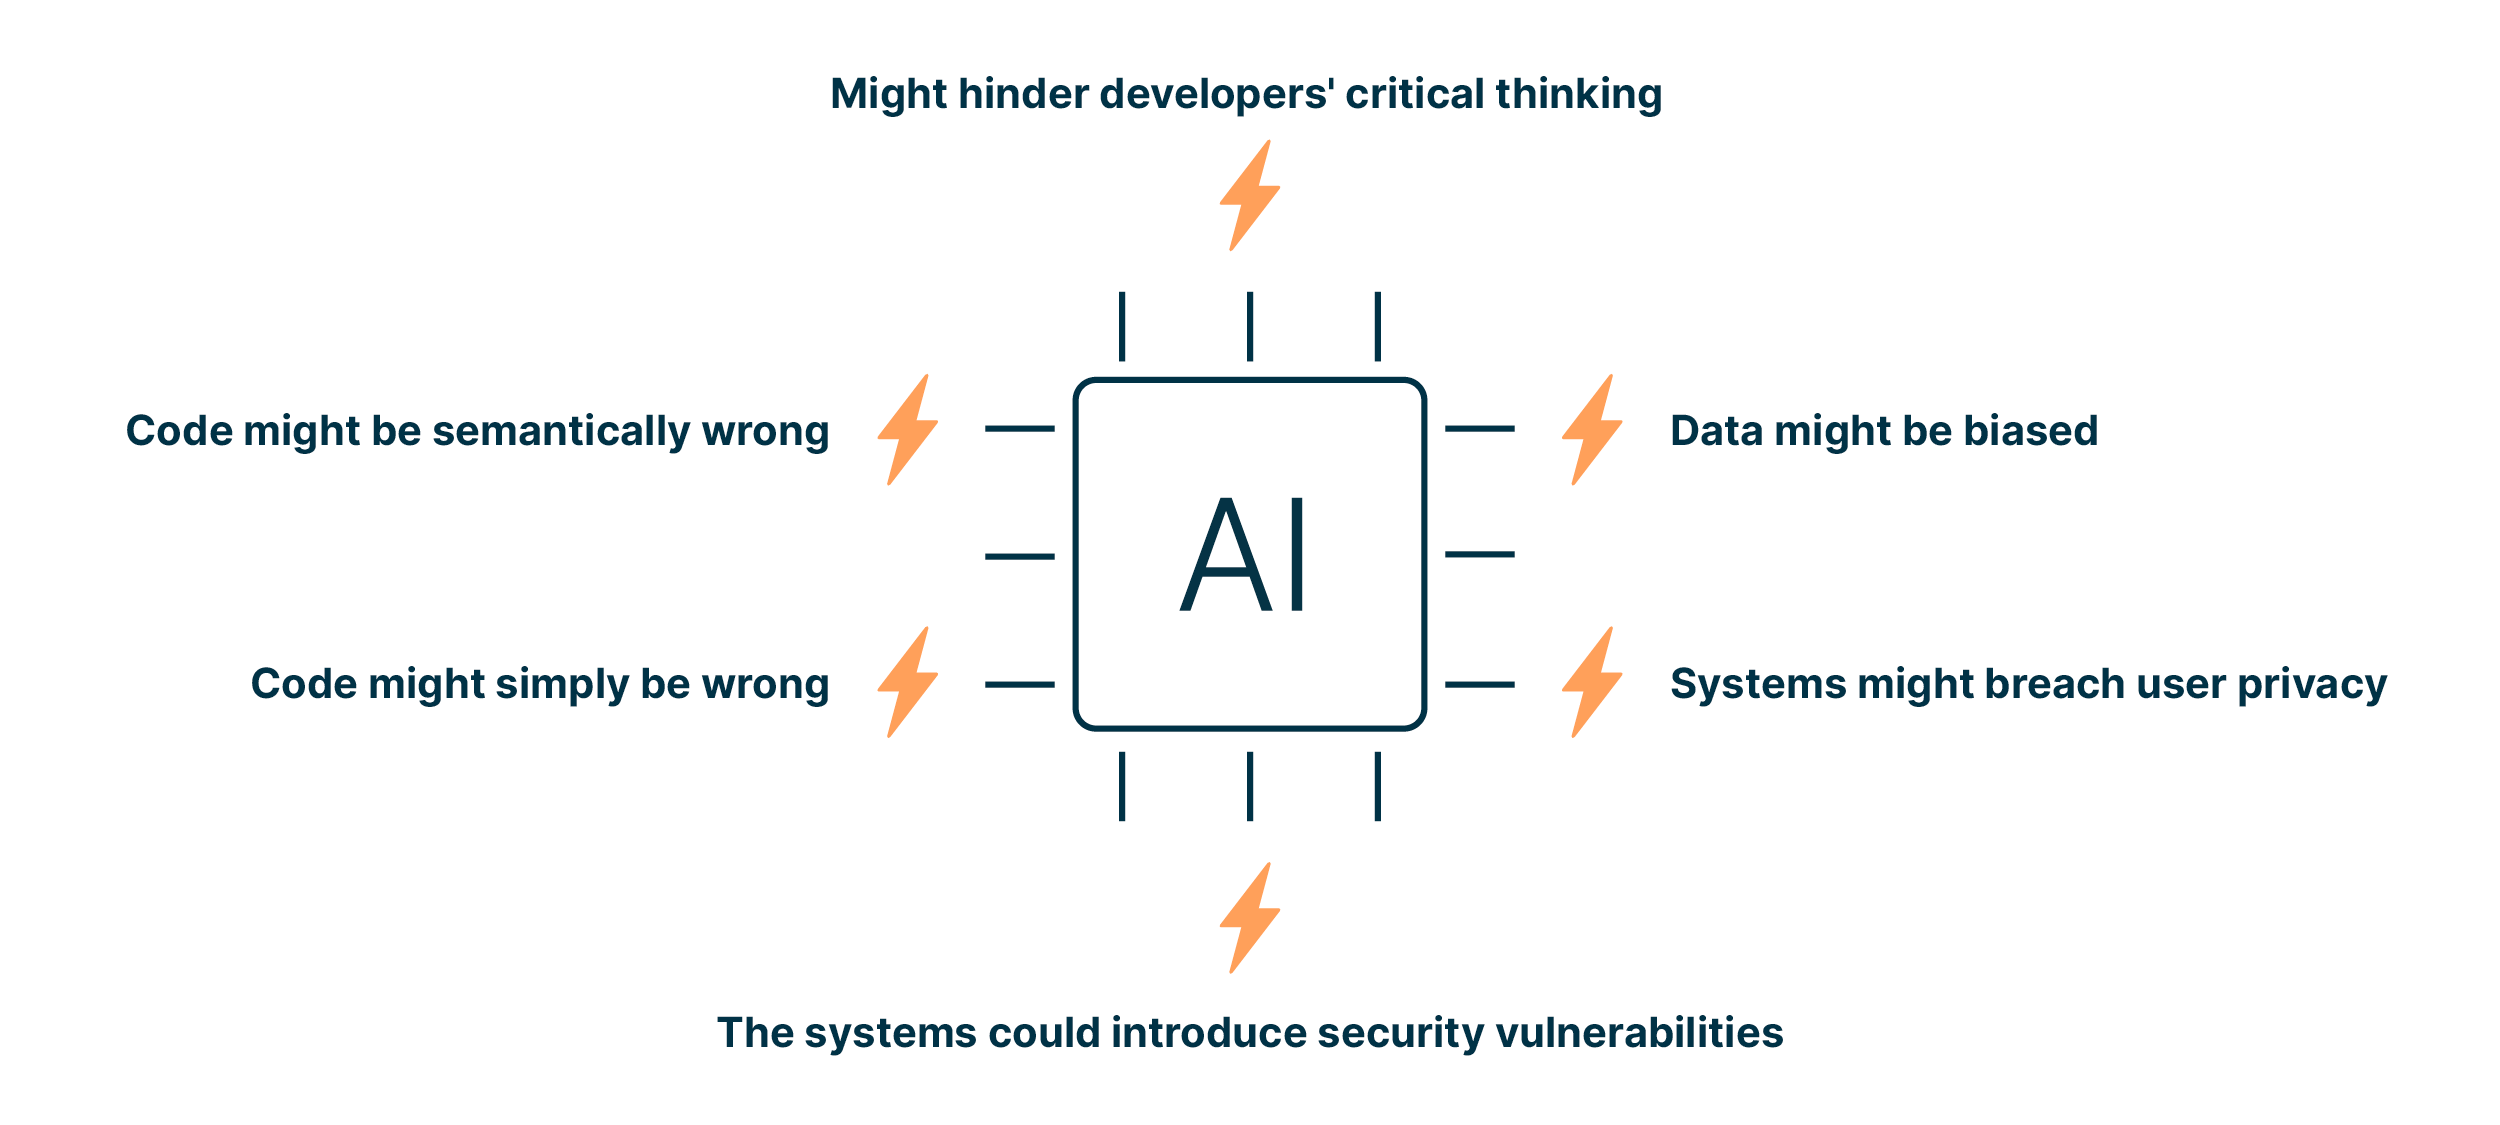 weaknesses_of_AI_systems_eg_biased_data_breach_of_privacy_vulnerabilities_wrong_code_hindering_critical_thinking